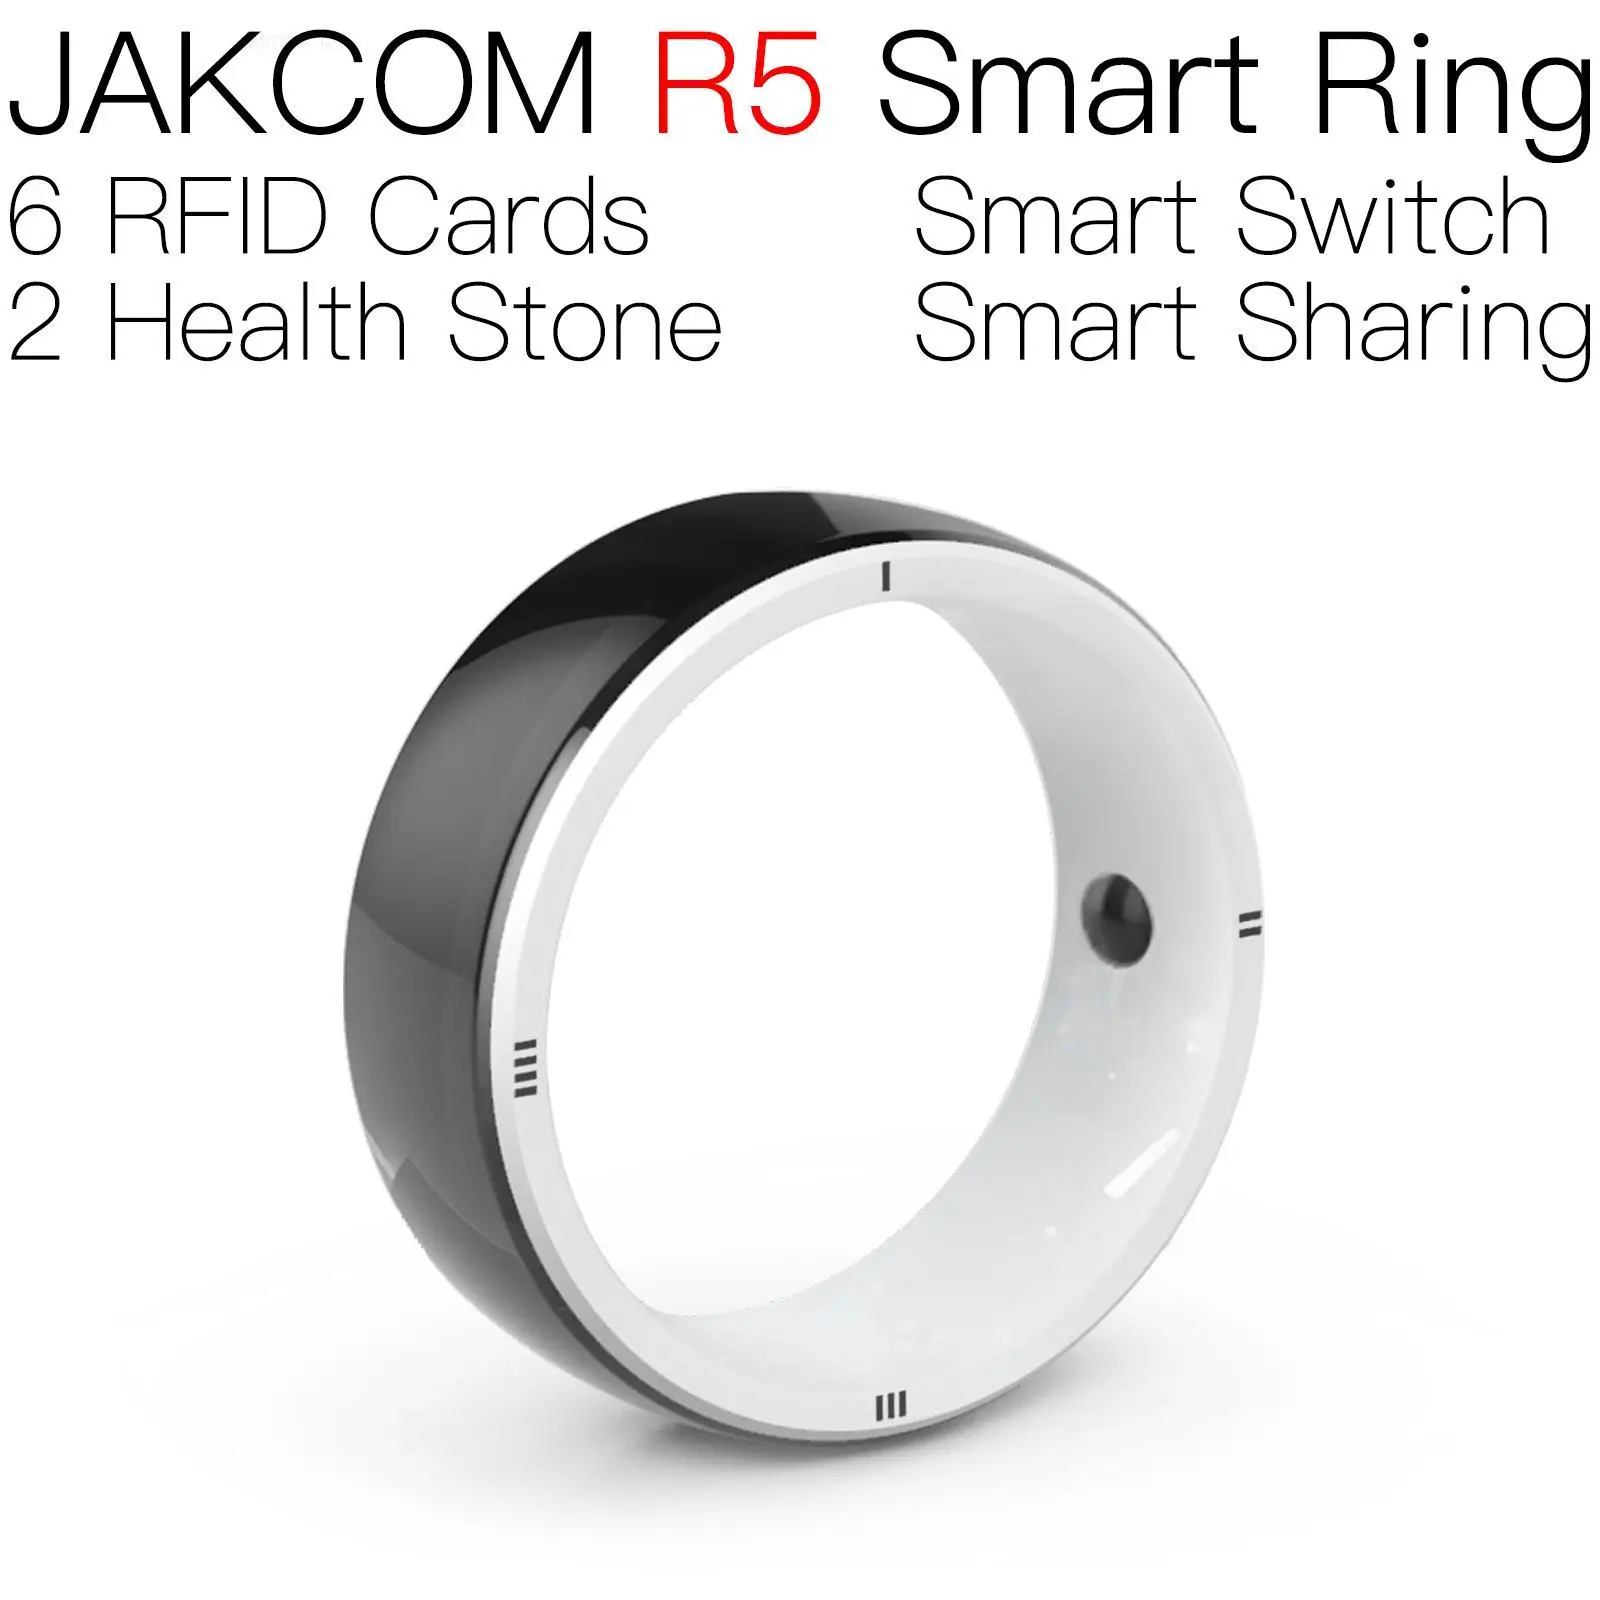 

JAKCOM R5 Smart Ring New arrival as rfid 125khz 10pcs pay nfc card uid changeable guia horizons plant cup holder chip al 825